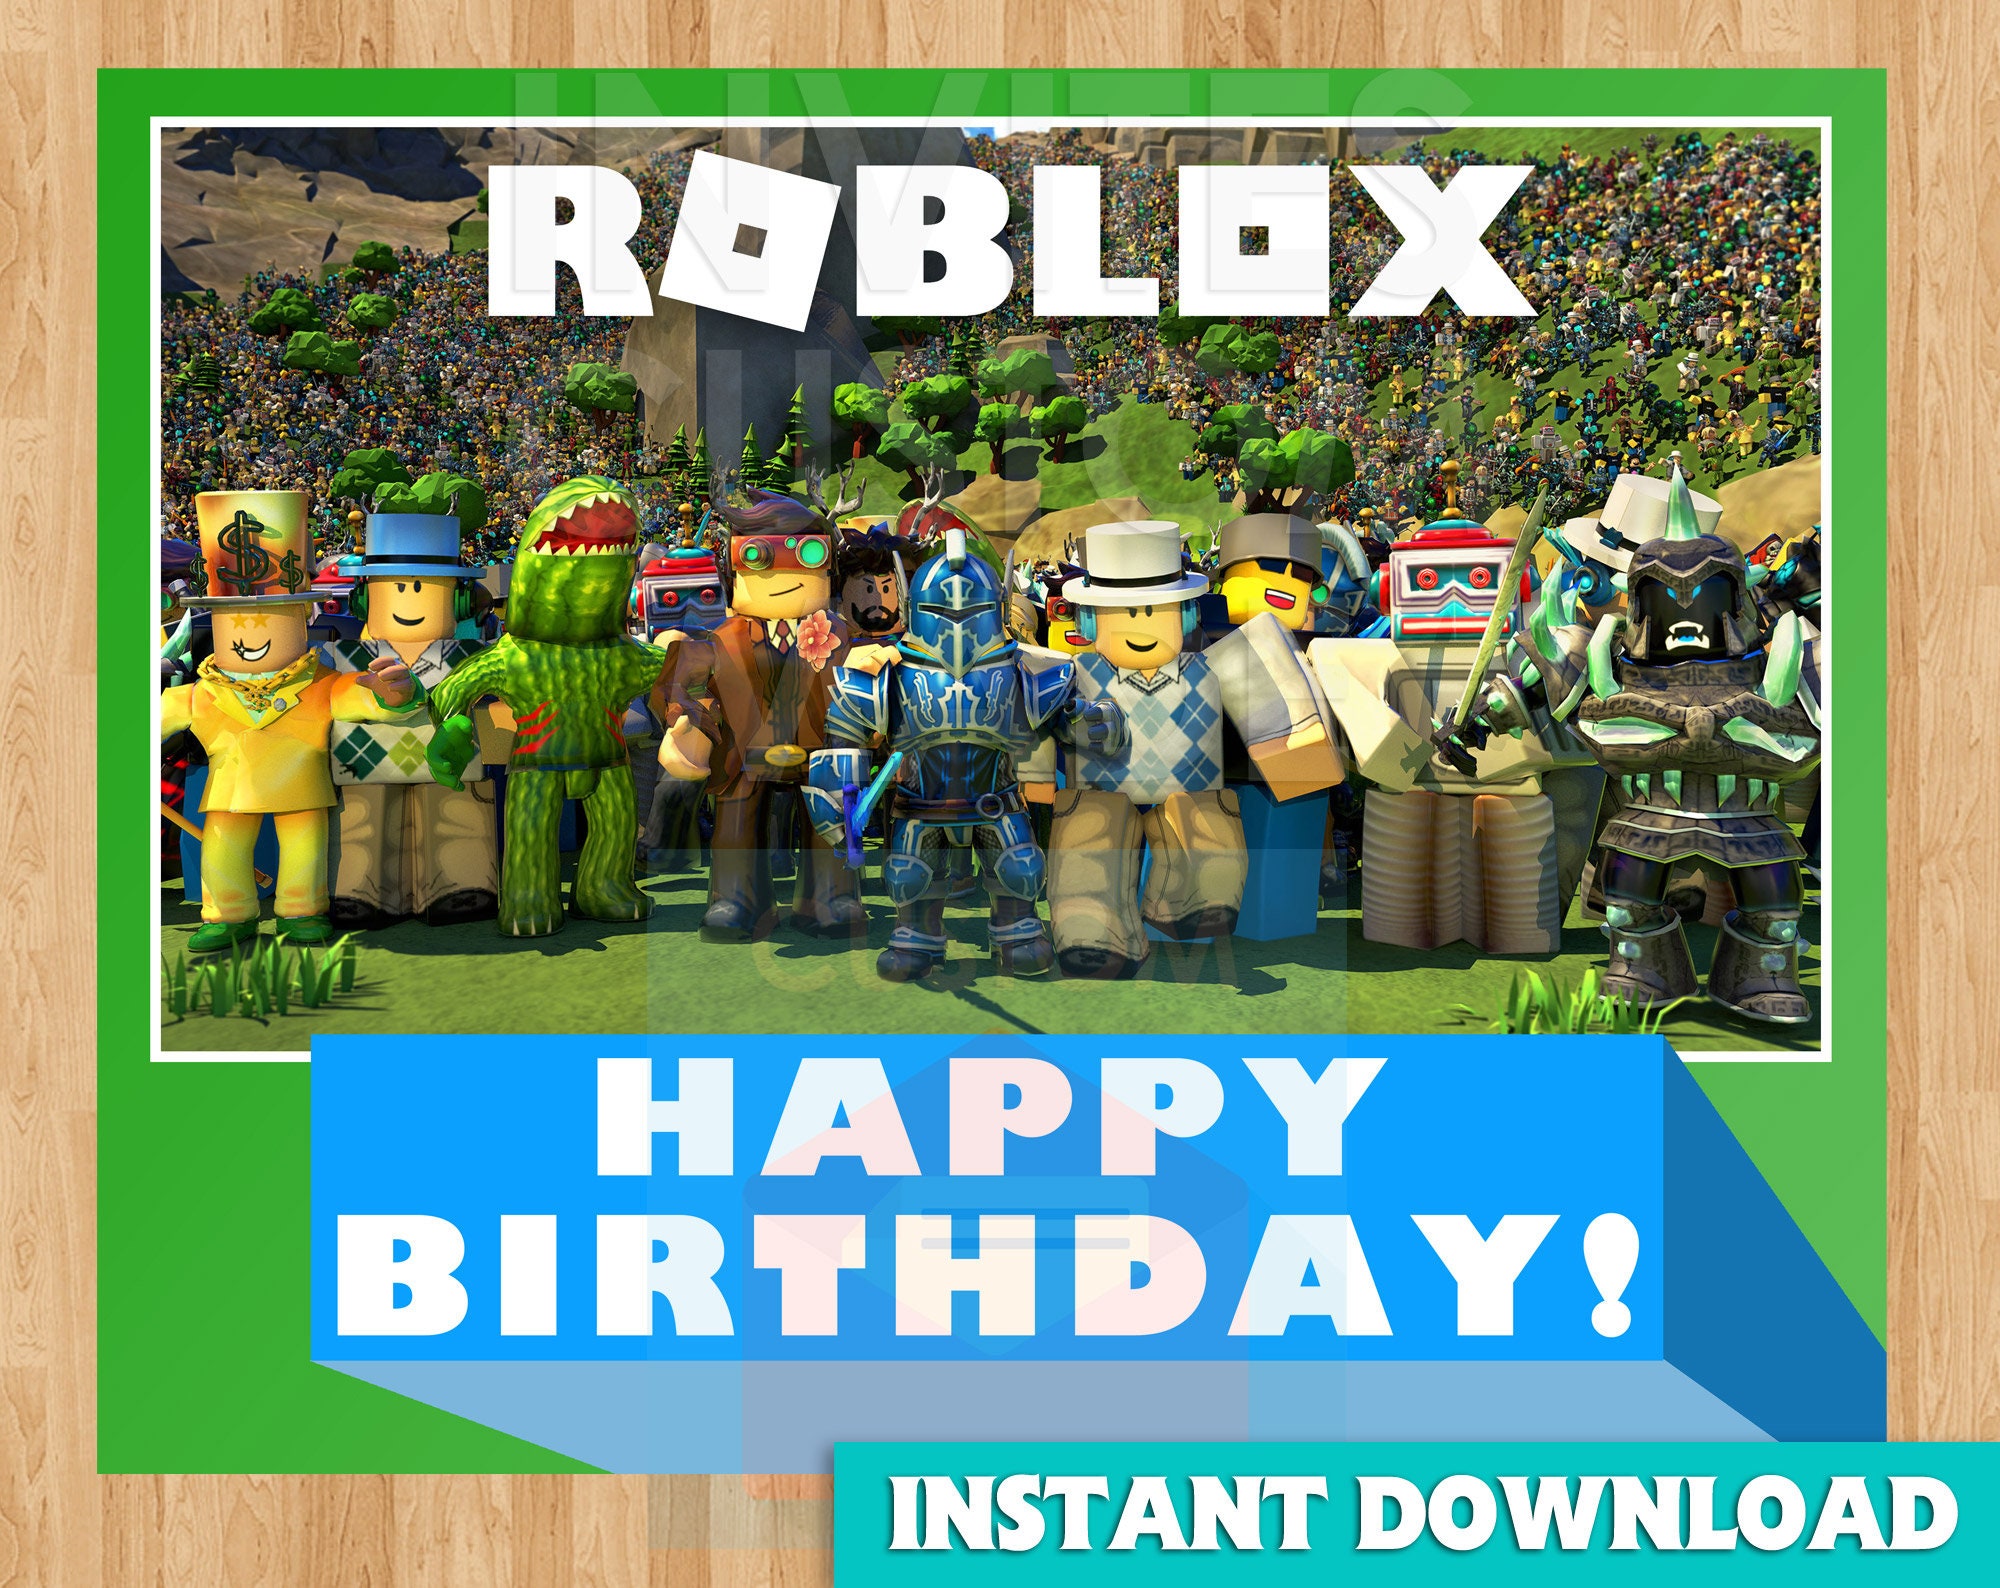 Roblox Happy Birthday Sign Instant Download Roblox Birthday Etsy - images of roblox banner